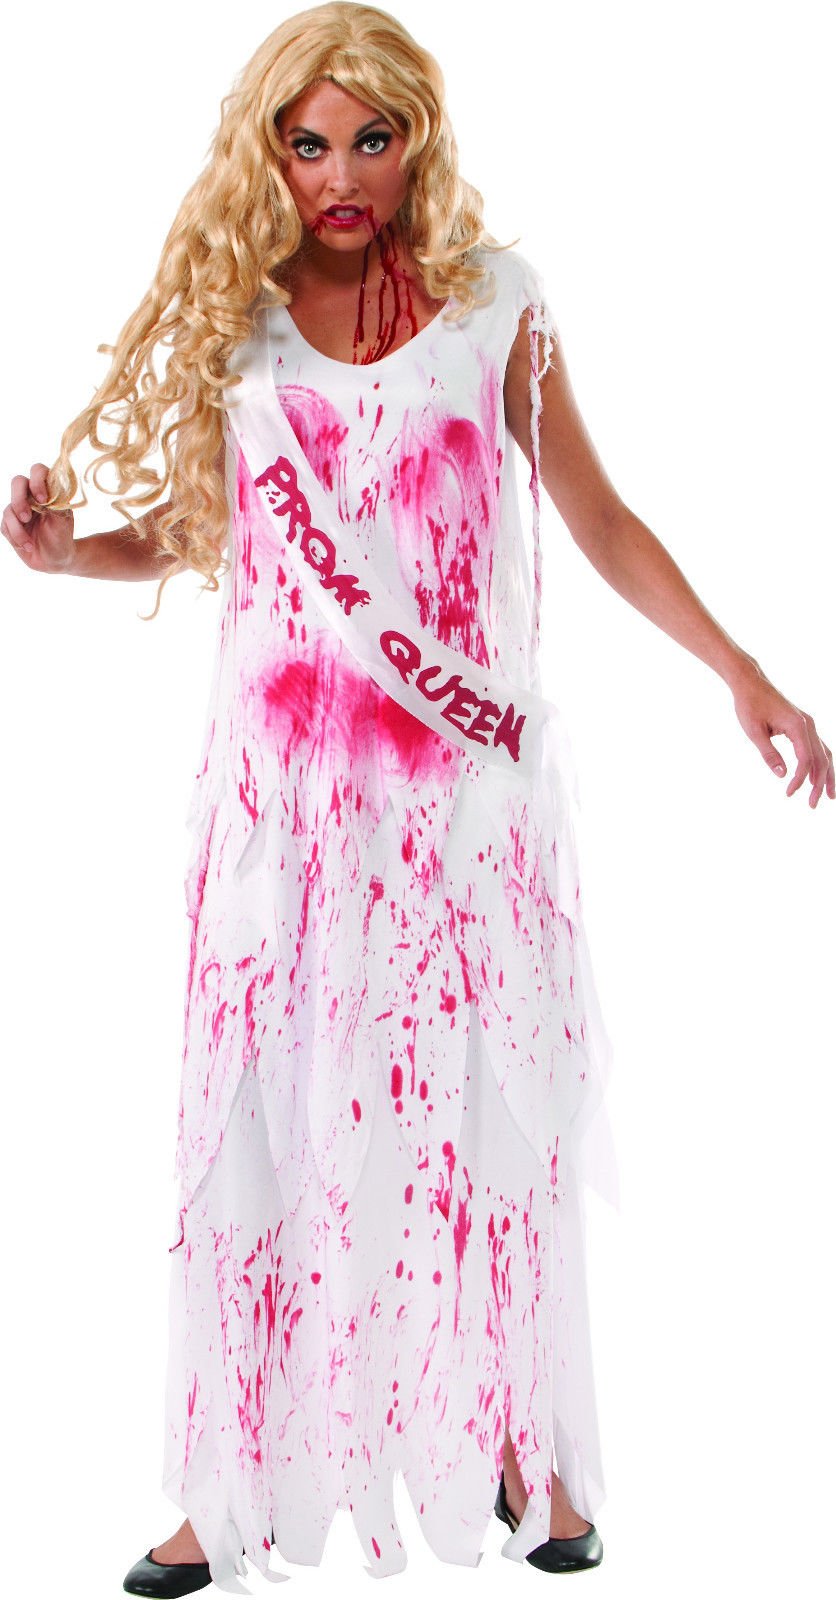 Adult Bloody Prom Queen Costume by Rubies - Bargainwizz